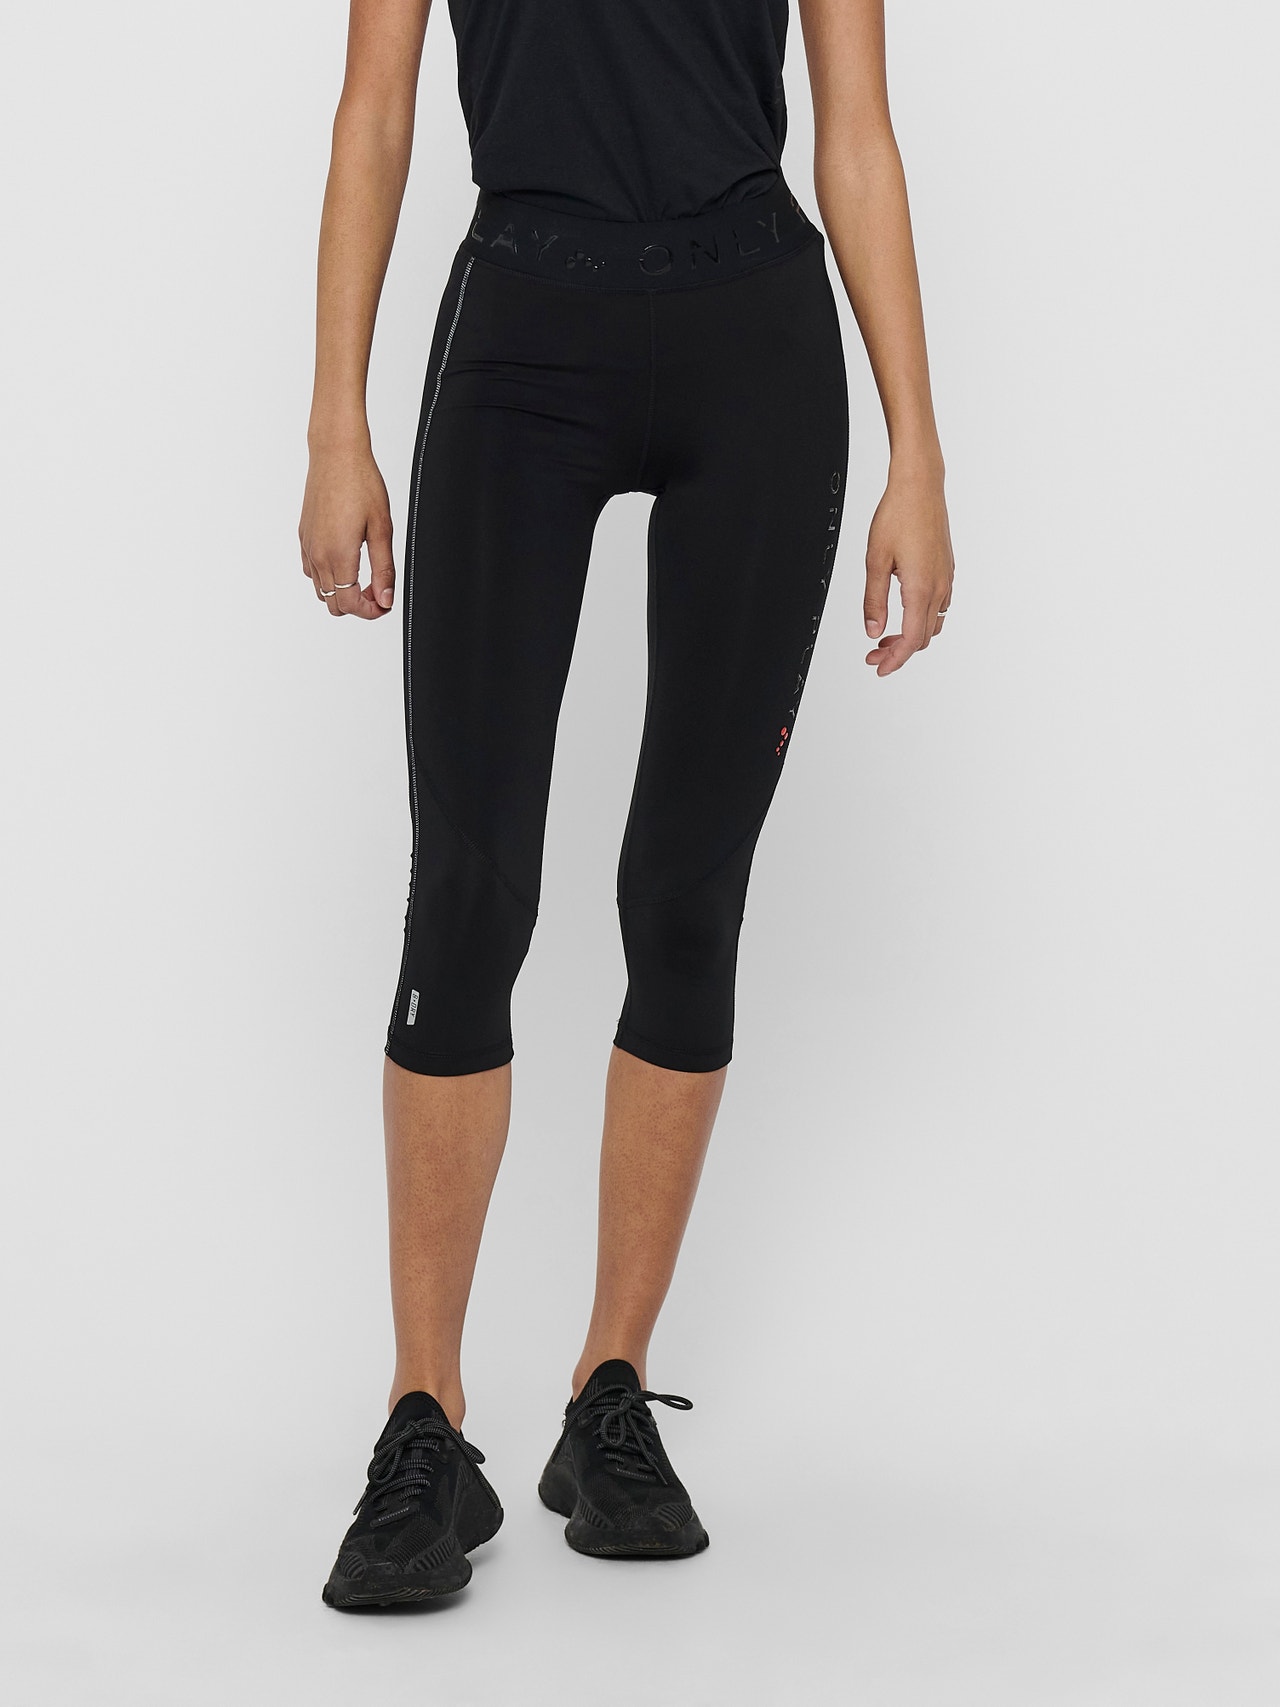 Tight fit Legging | Black ONLY®